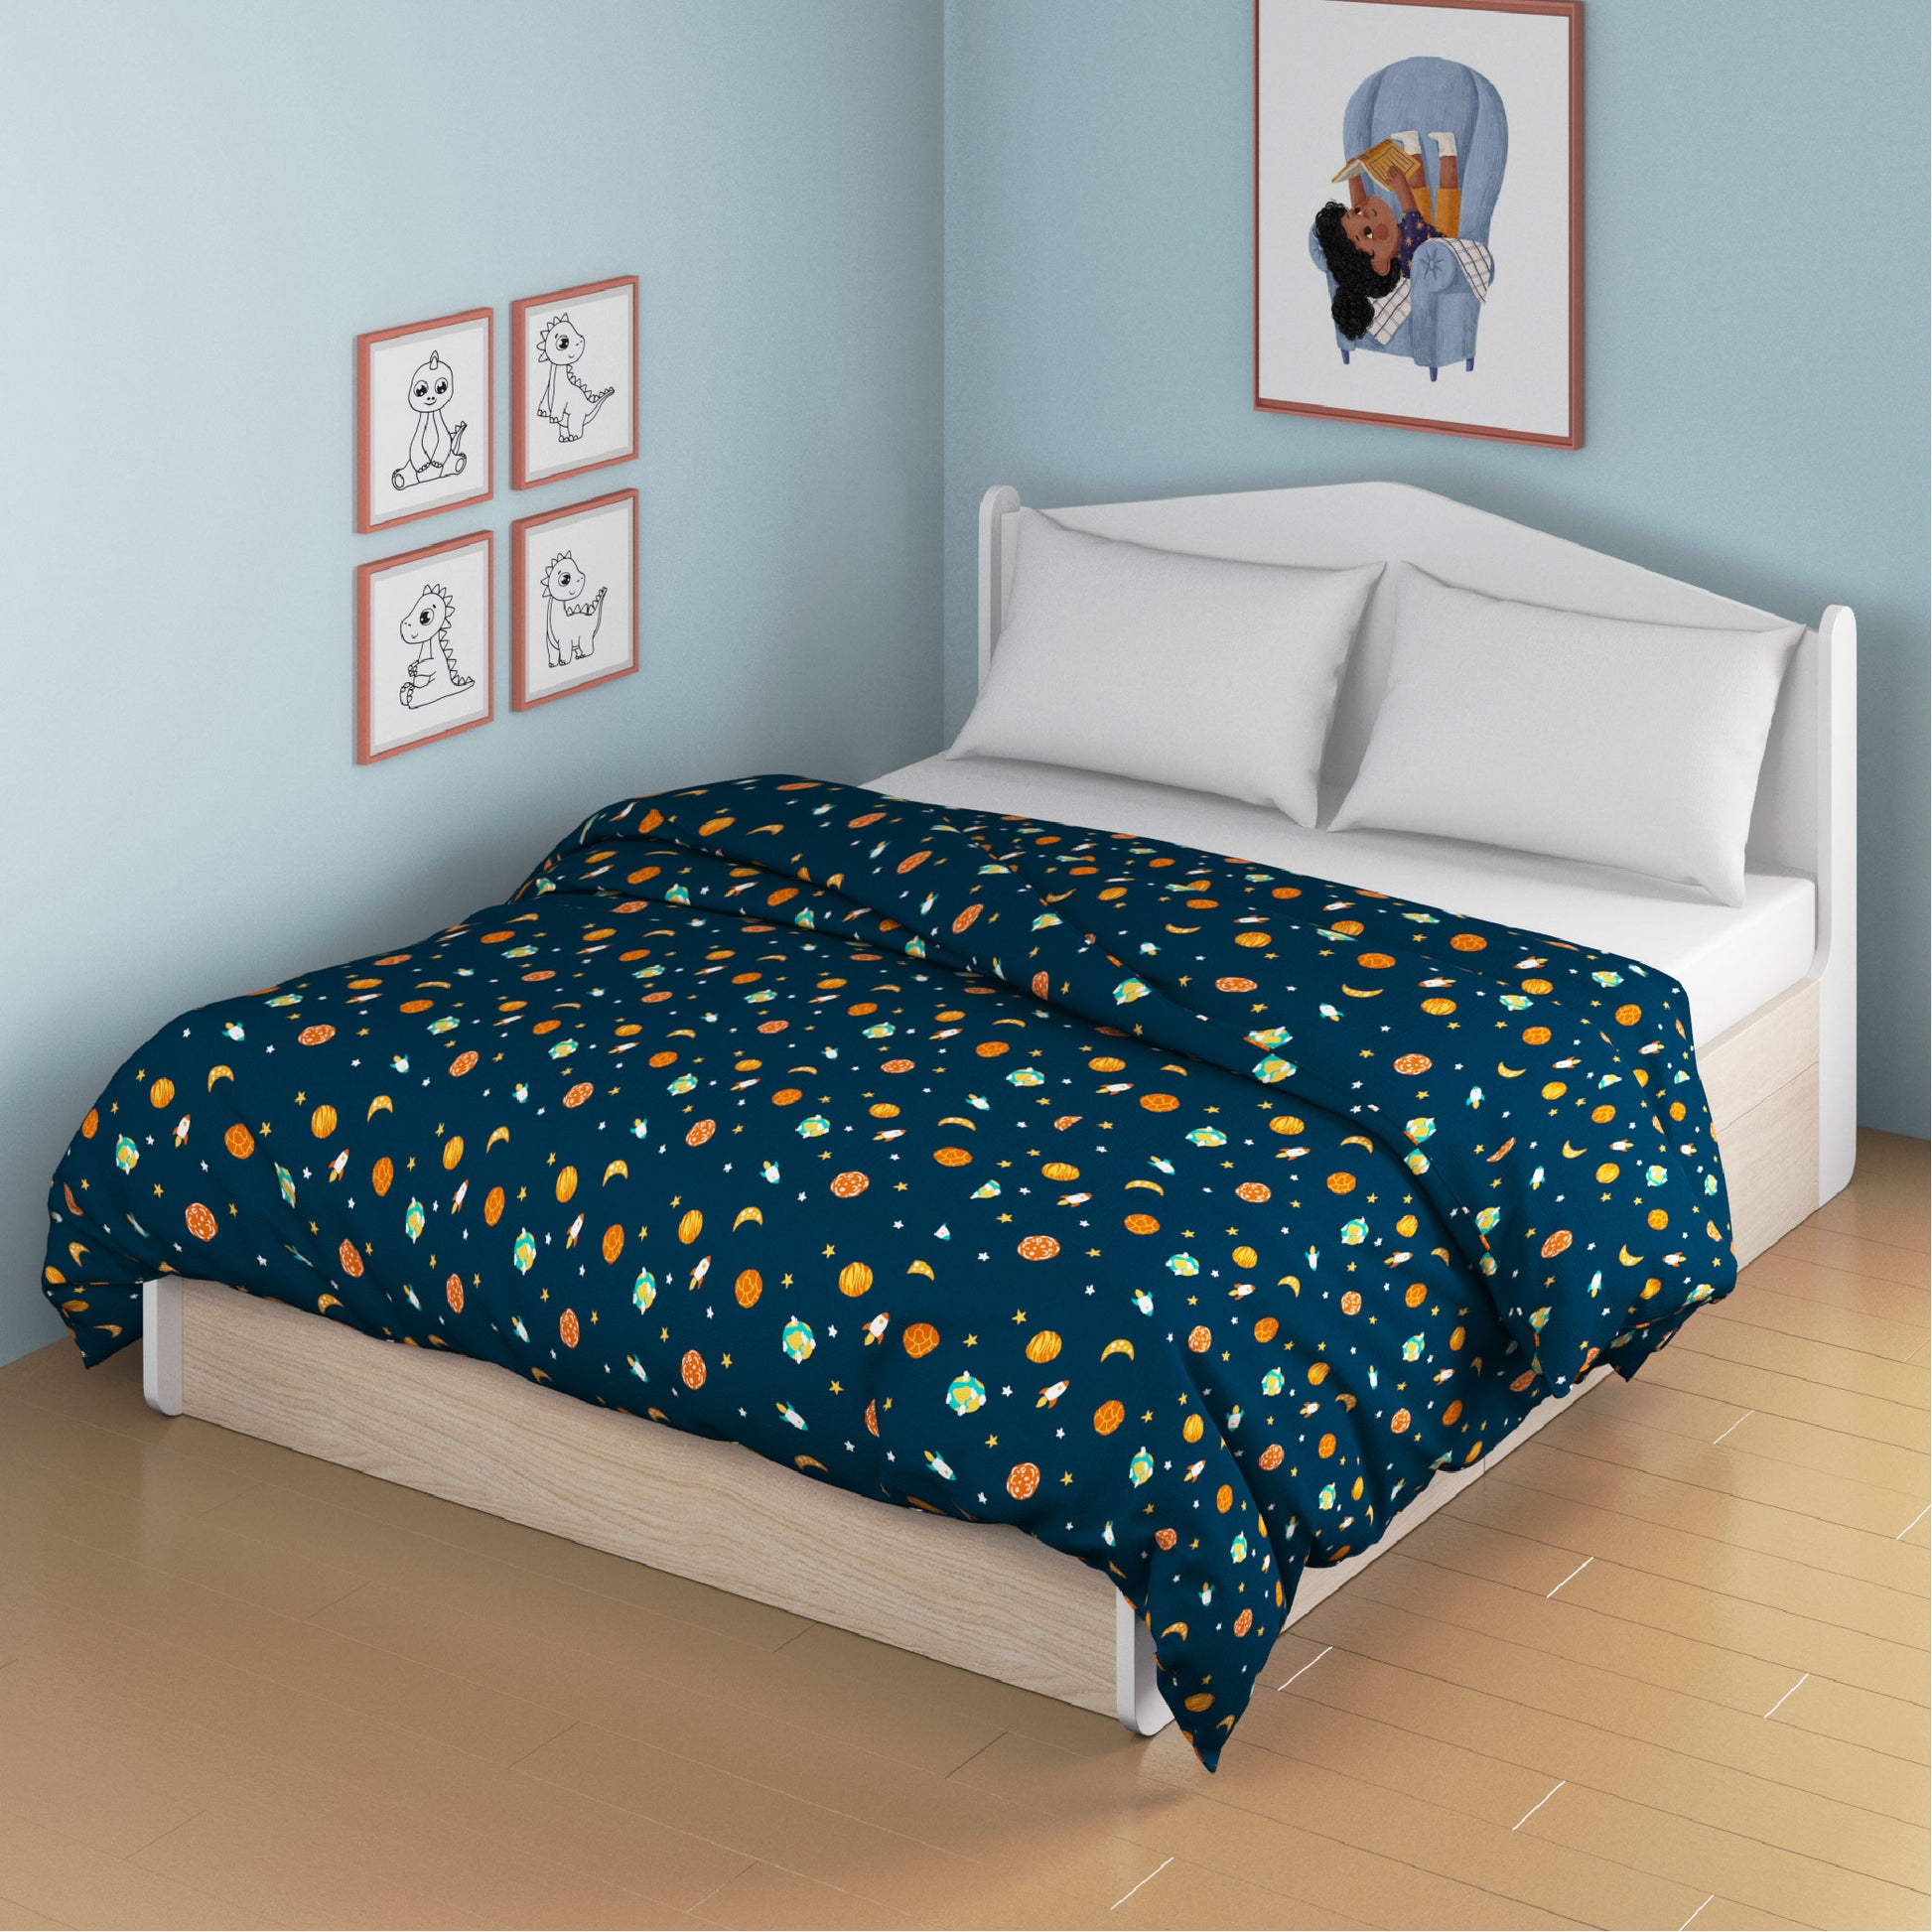 media_gallary Astronuts Dohar Queen Bed Size 1